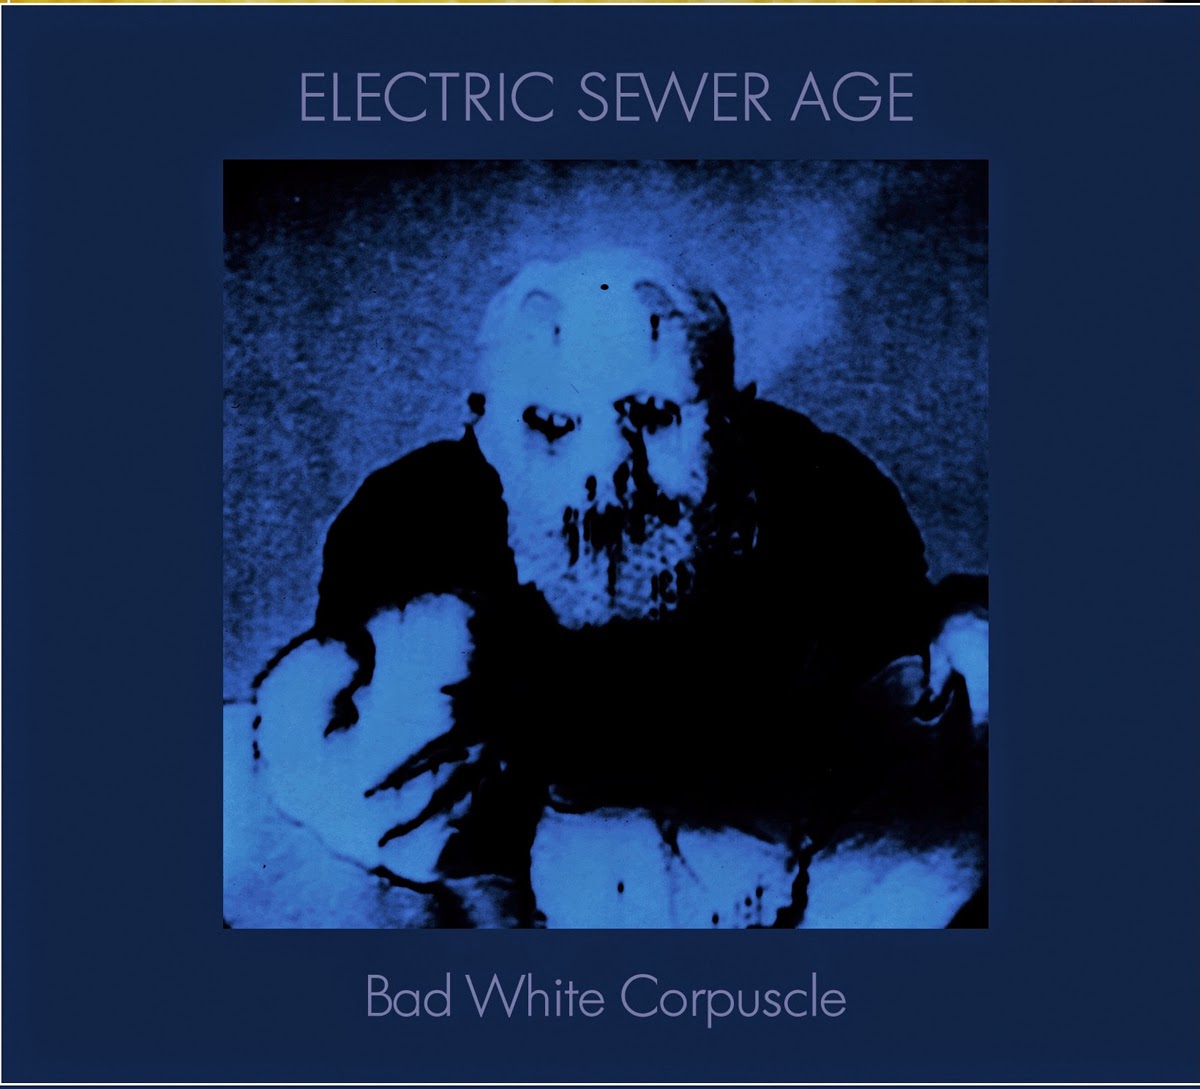 Electric Sewer age contemplating Nothingness. Bad age